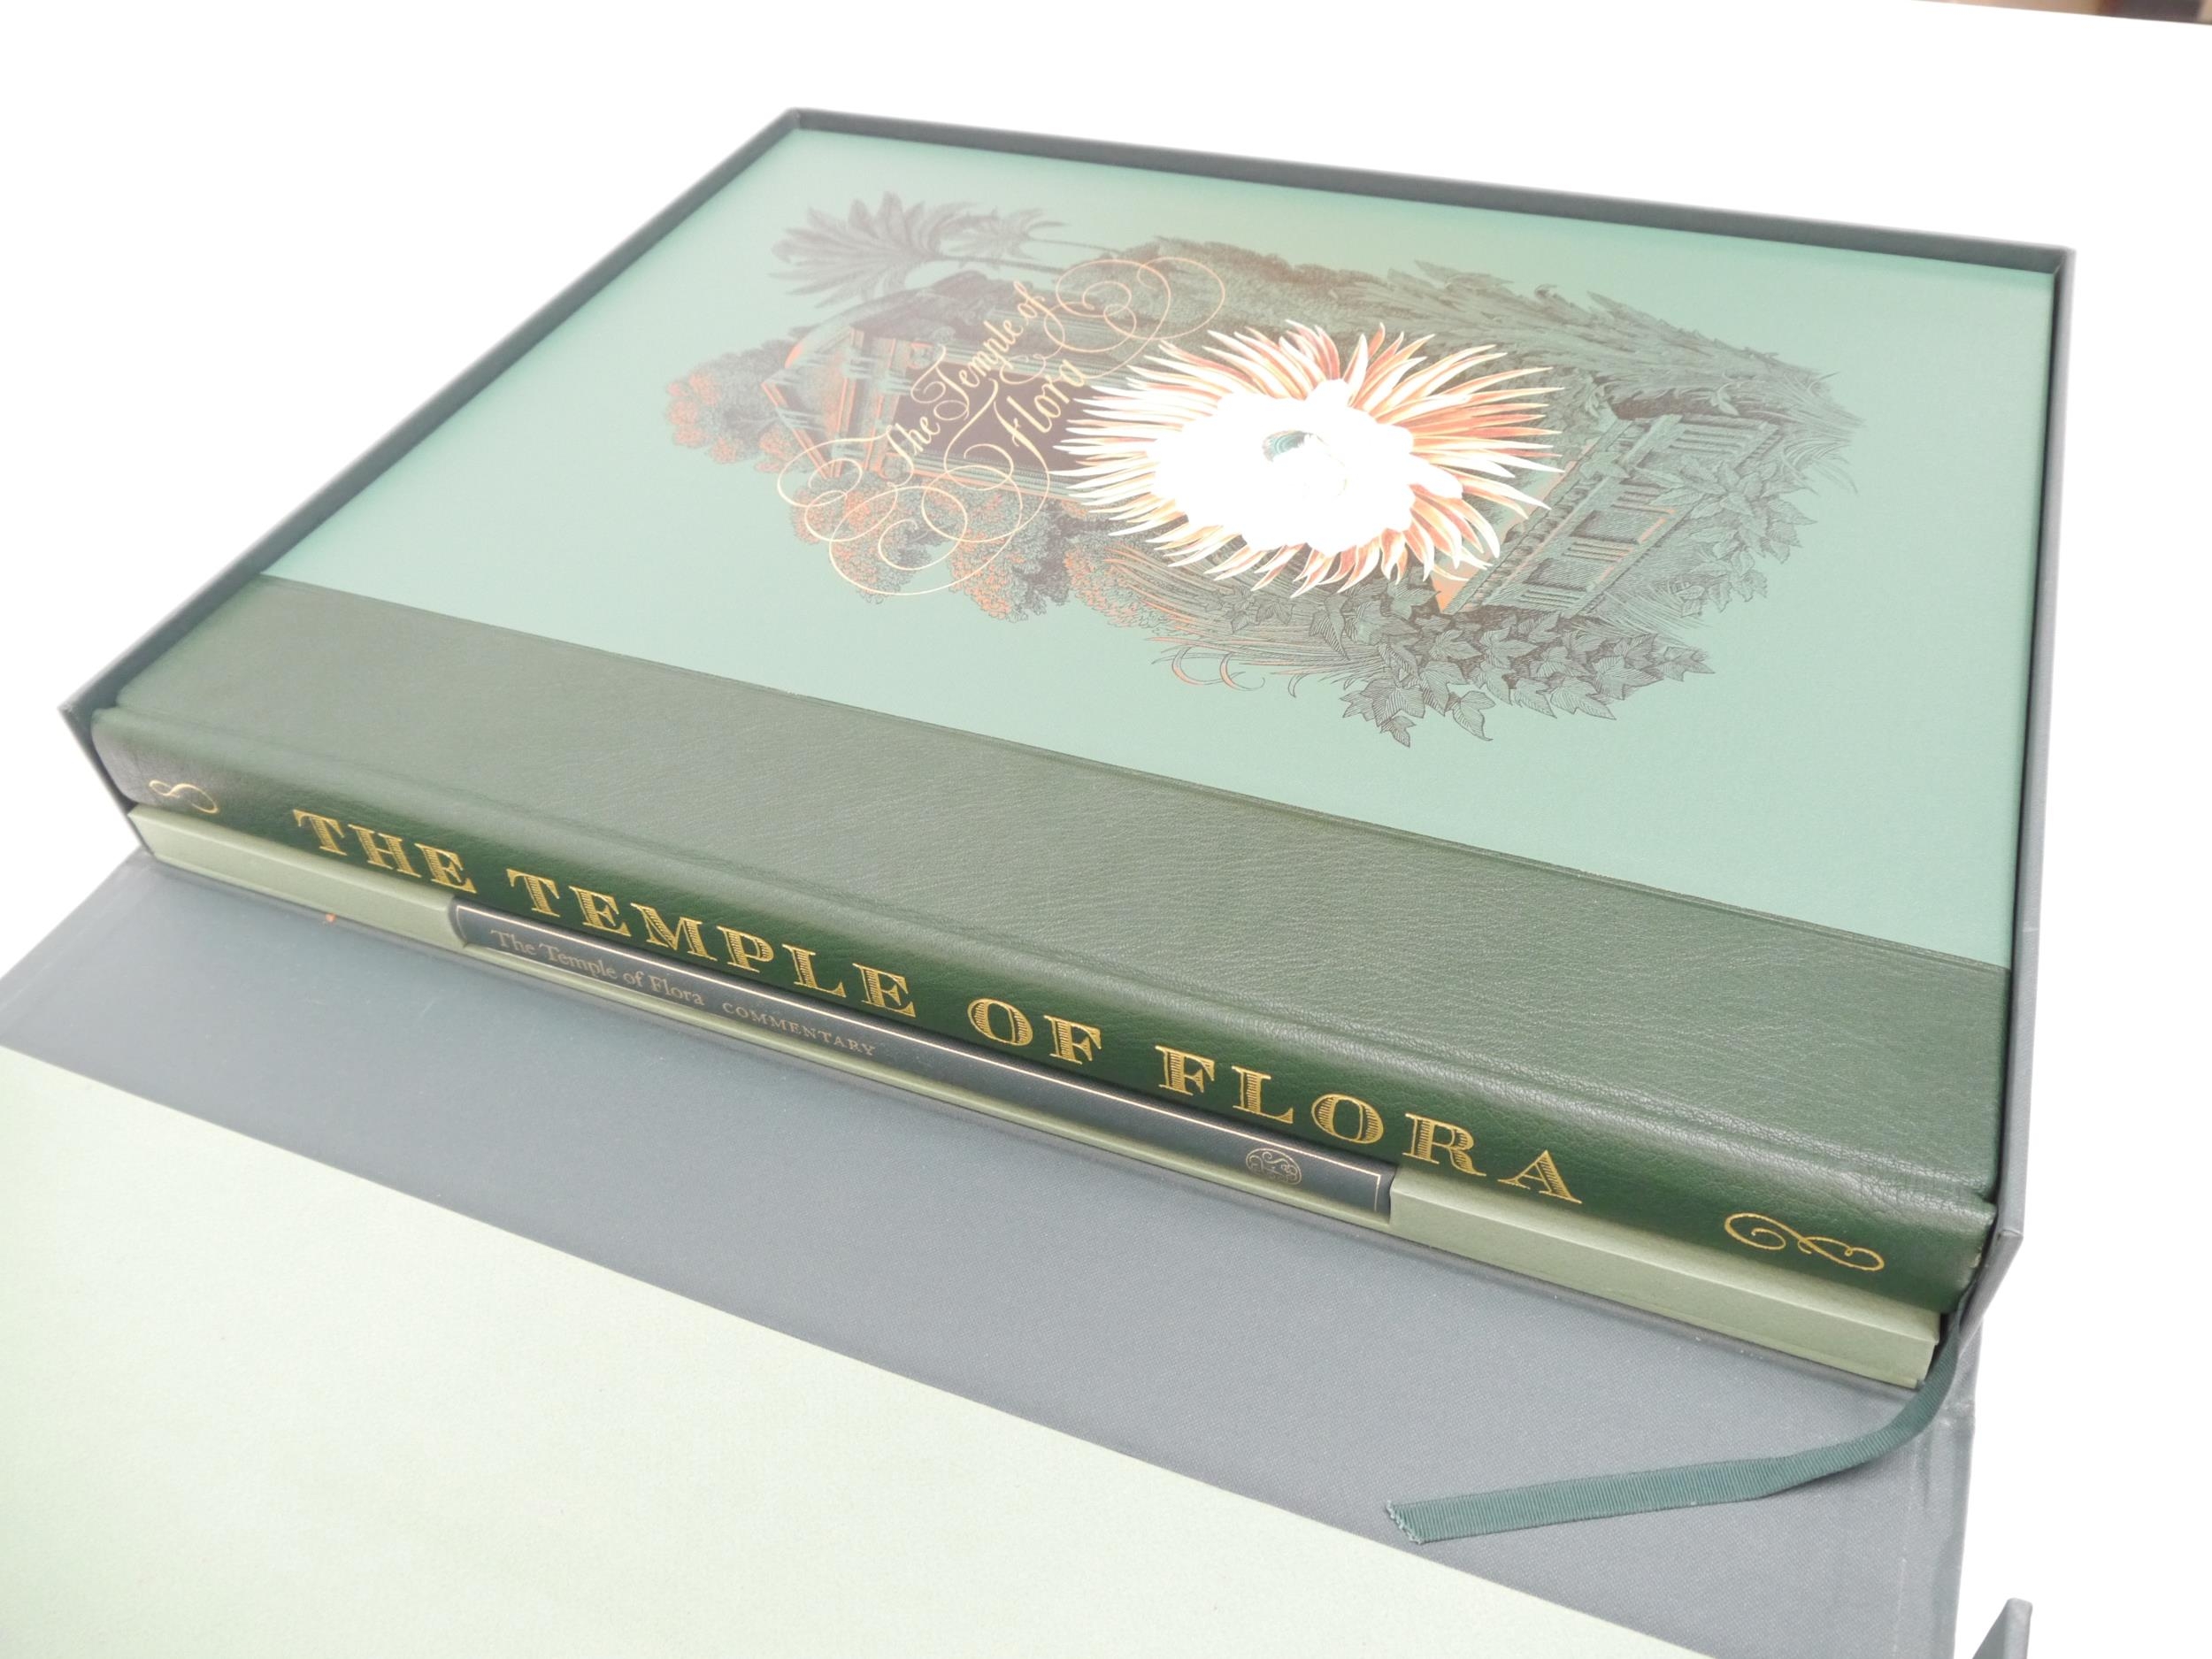 (Botany.) Robert Thornton: 'The Temple of Flora', London, The Folio Society, 2008, limited - Image 10 of 16